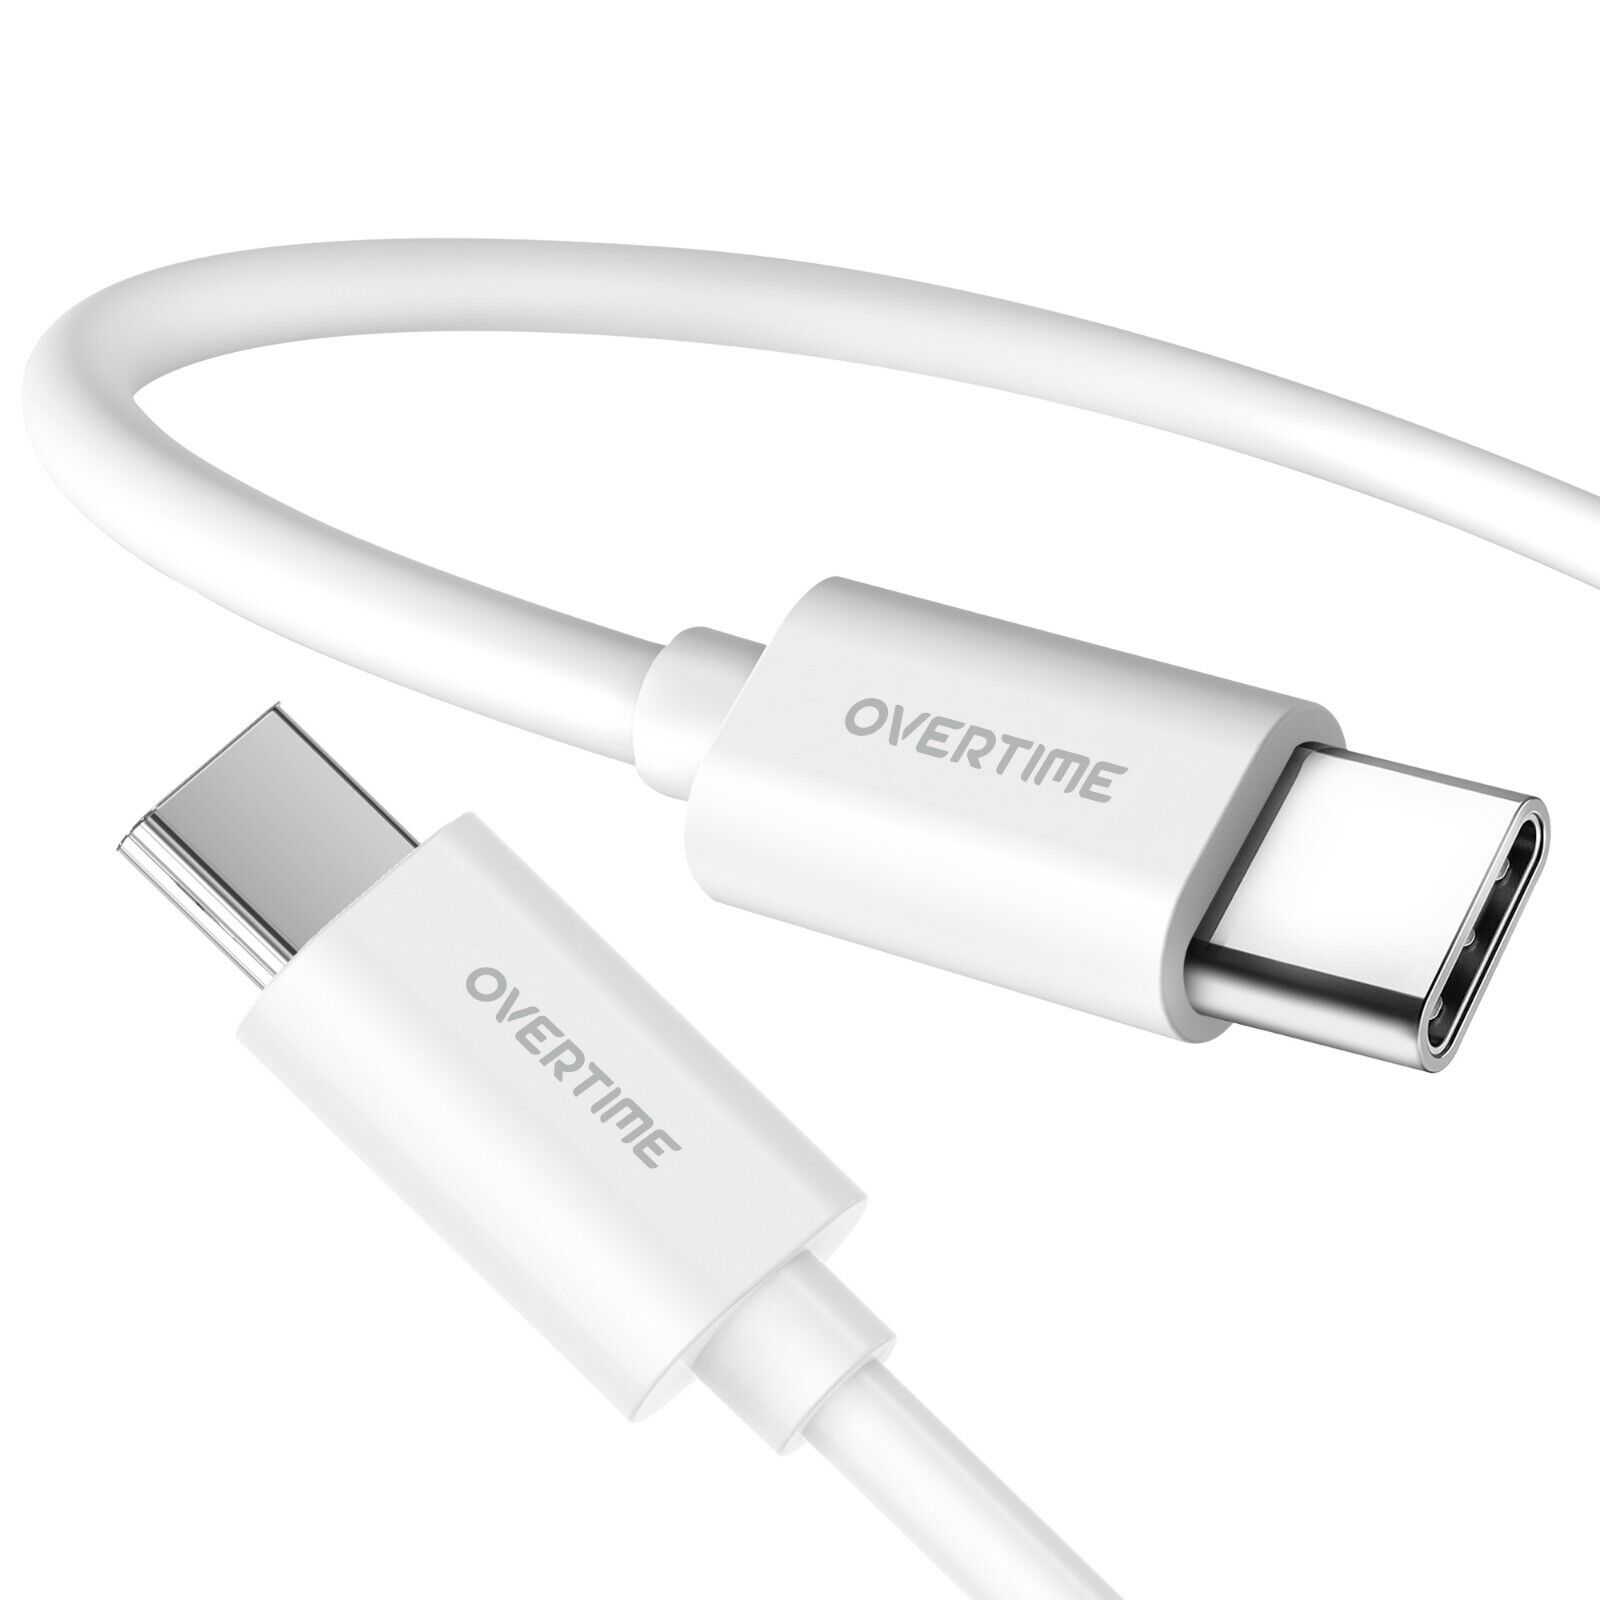 Overtime USB Type C Cable, 6ft Long Charging Cord for iPad Pro and Android